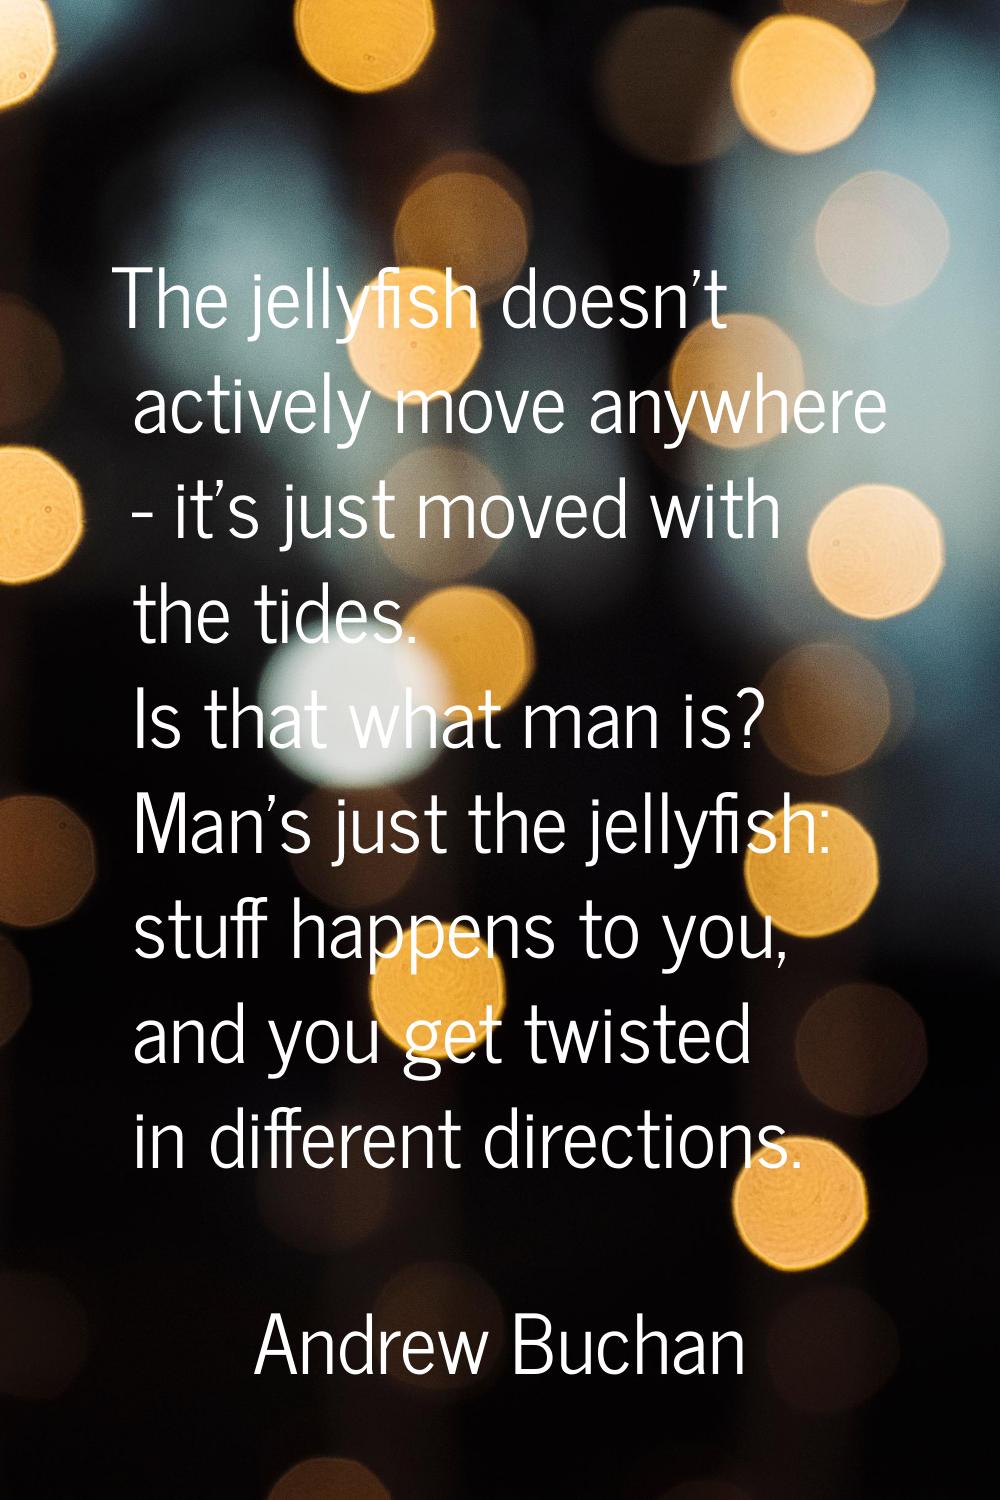 The jellyfish doesn't actively move anywhere - it's just moved with the tides. Is that what man is?